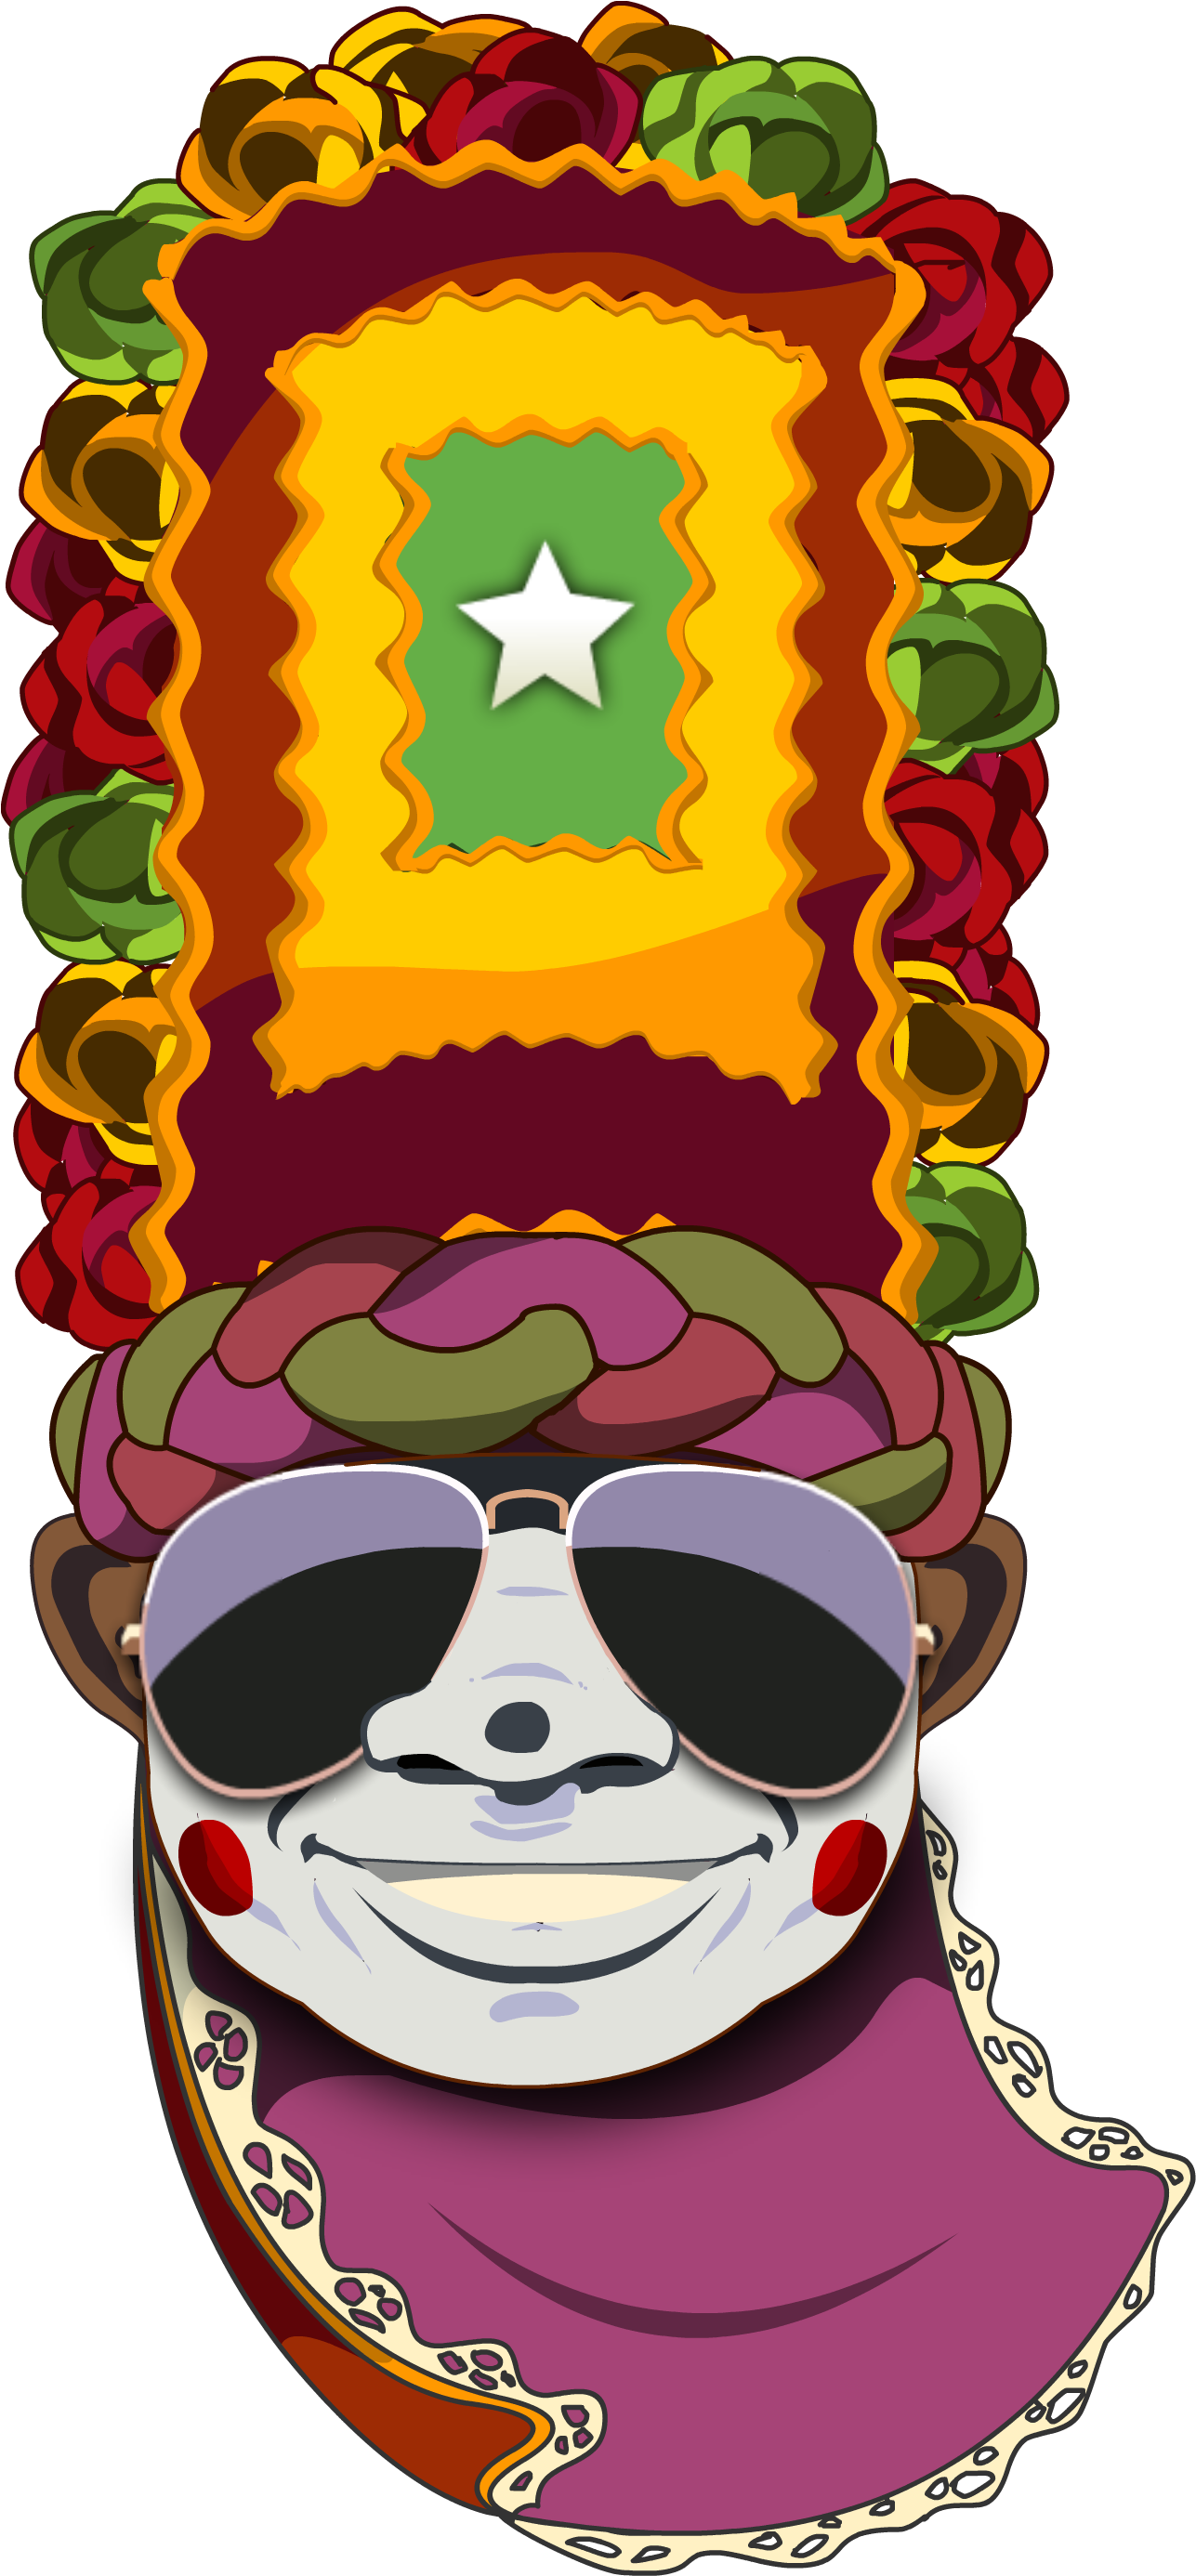 A Cartoon Character Wearing Sunglasses And A Hat